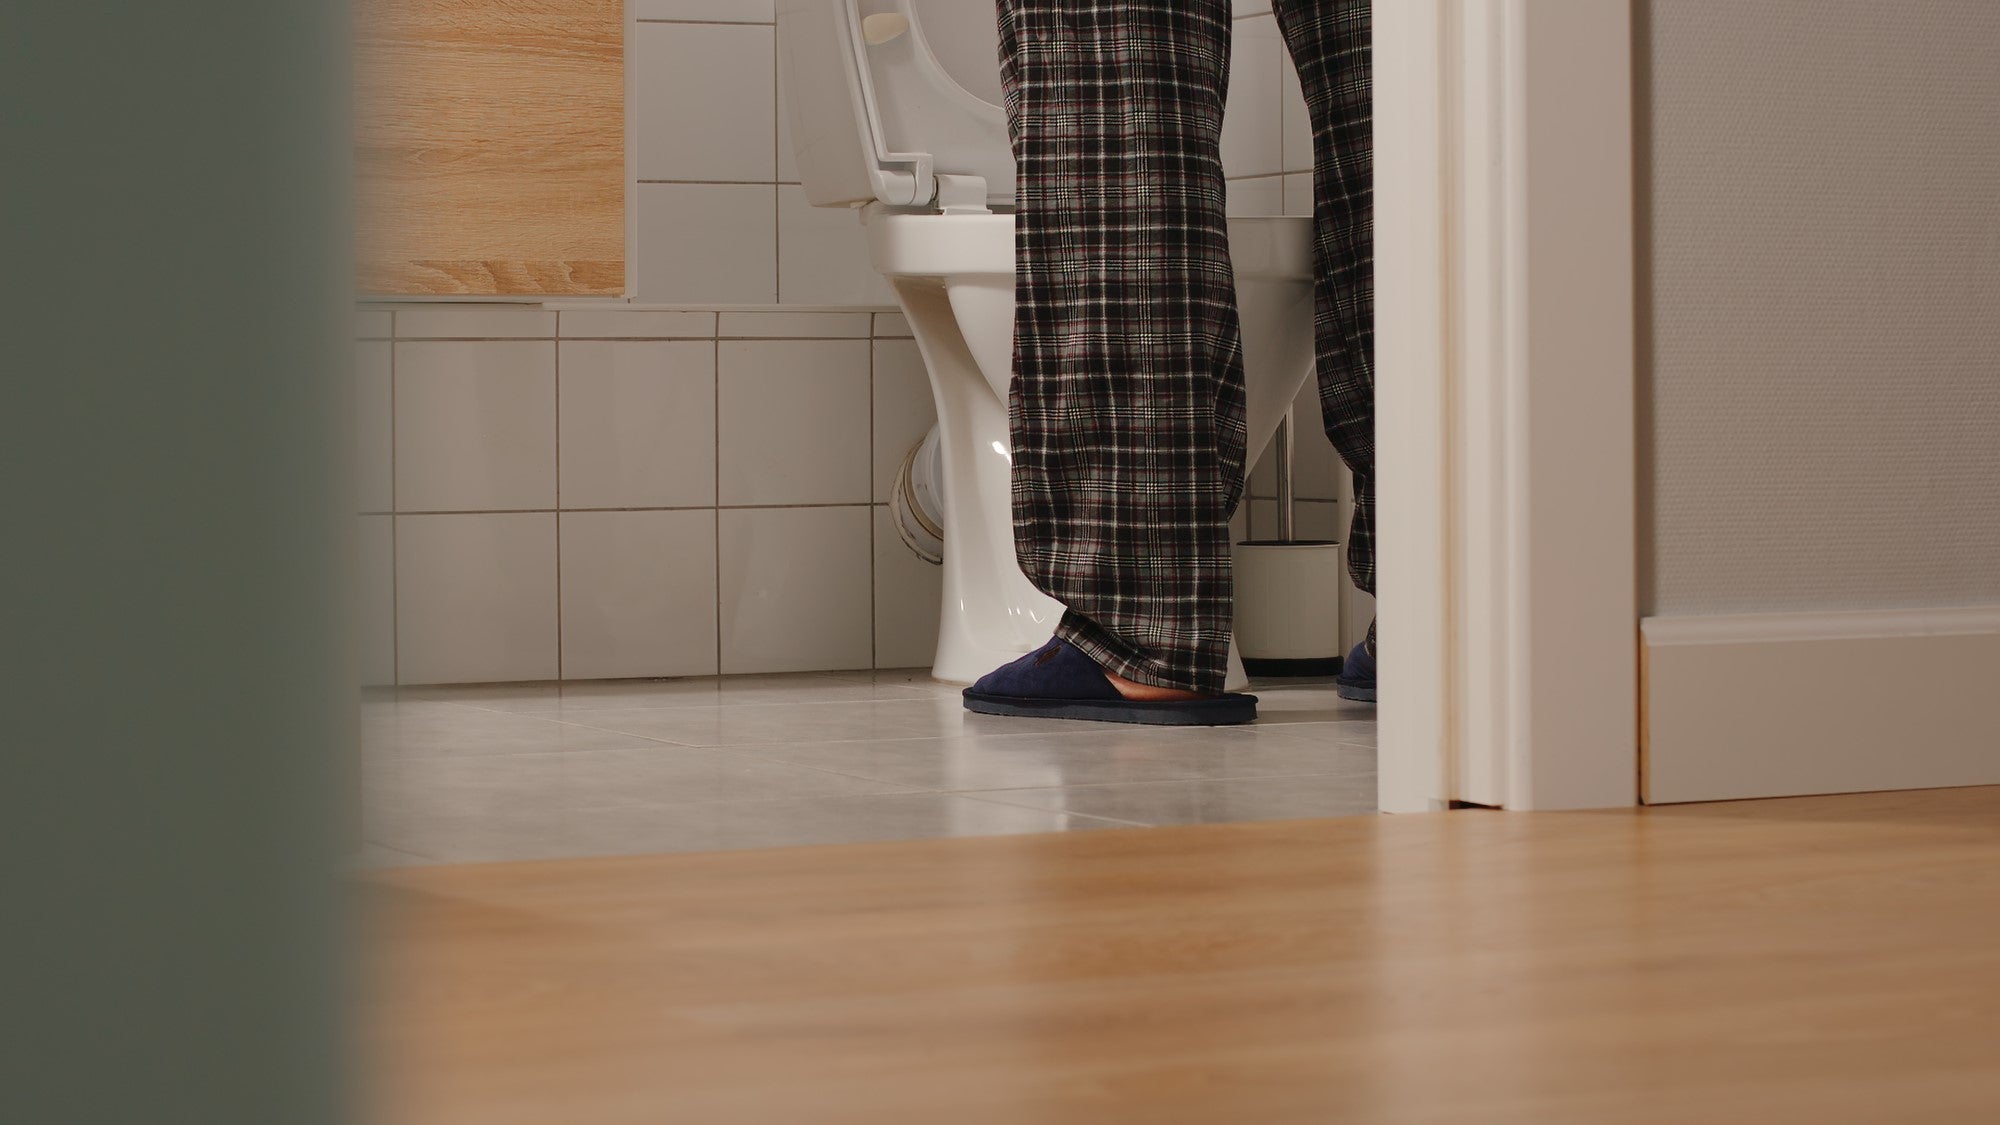 man in pyjamas and slippers standing at toilet, only lower legs visible